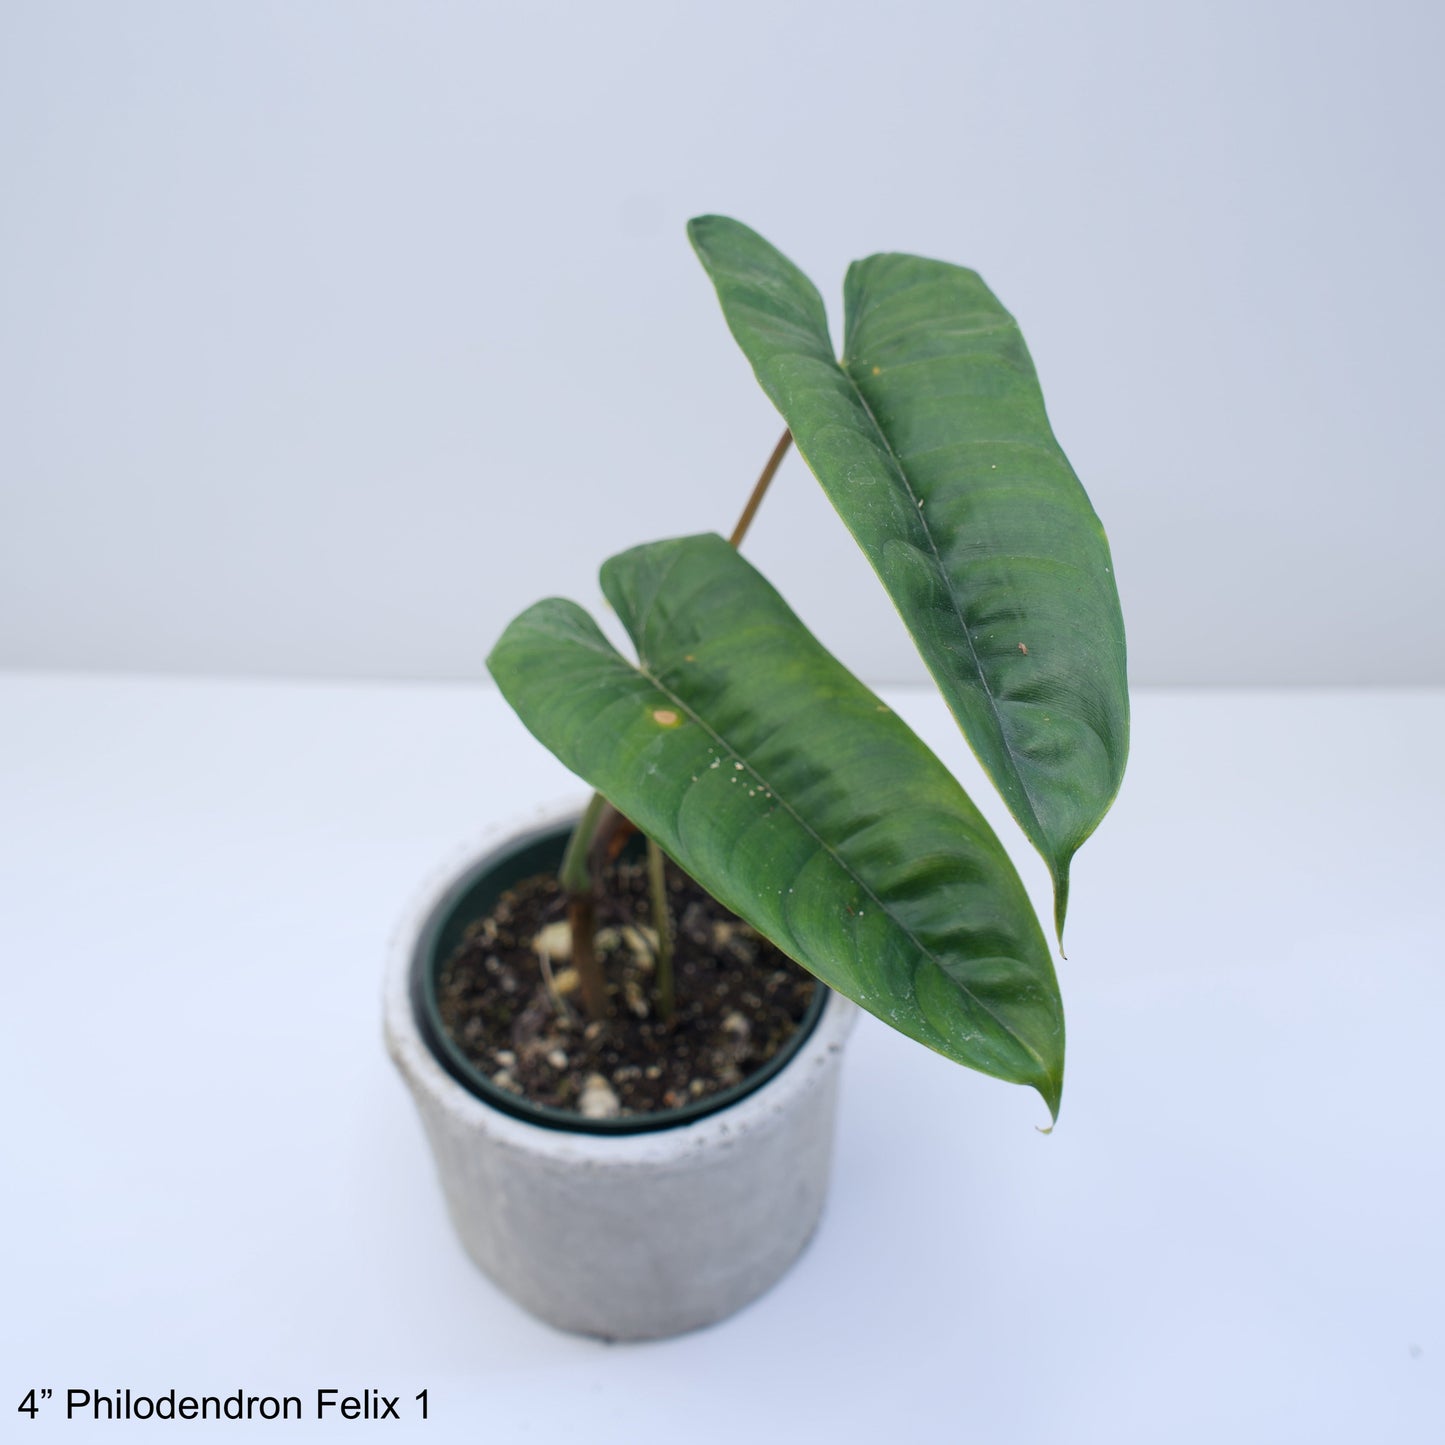 STORY SALE: 4" Philodendron Felix